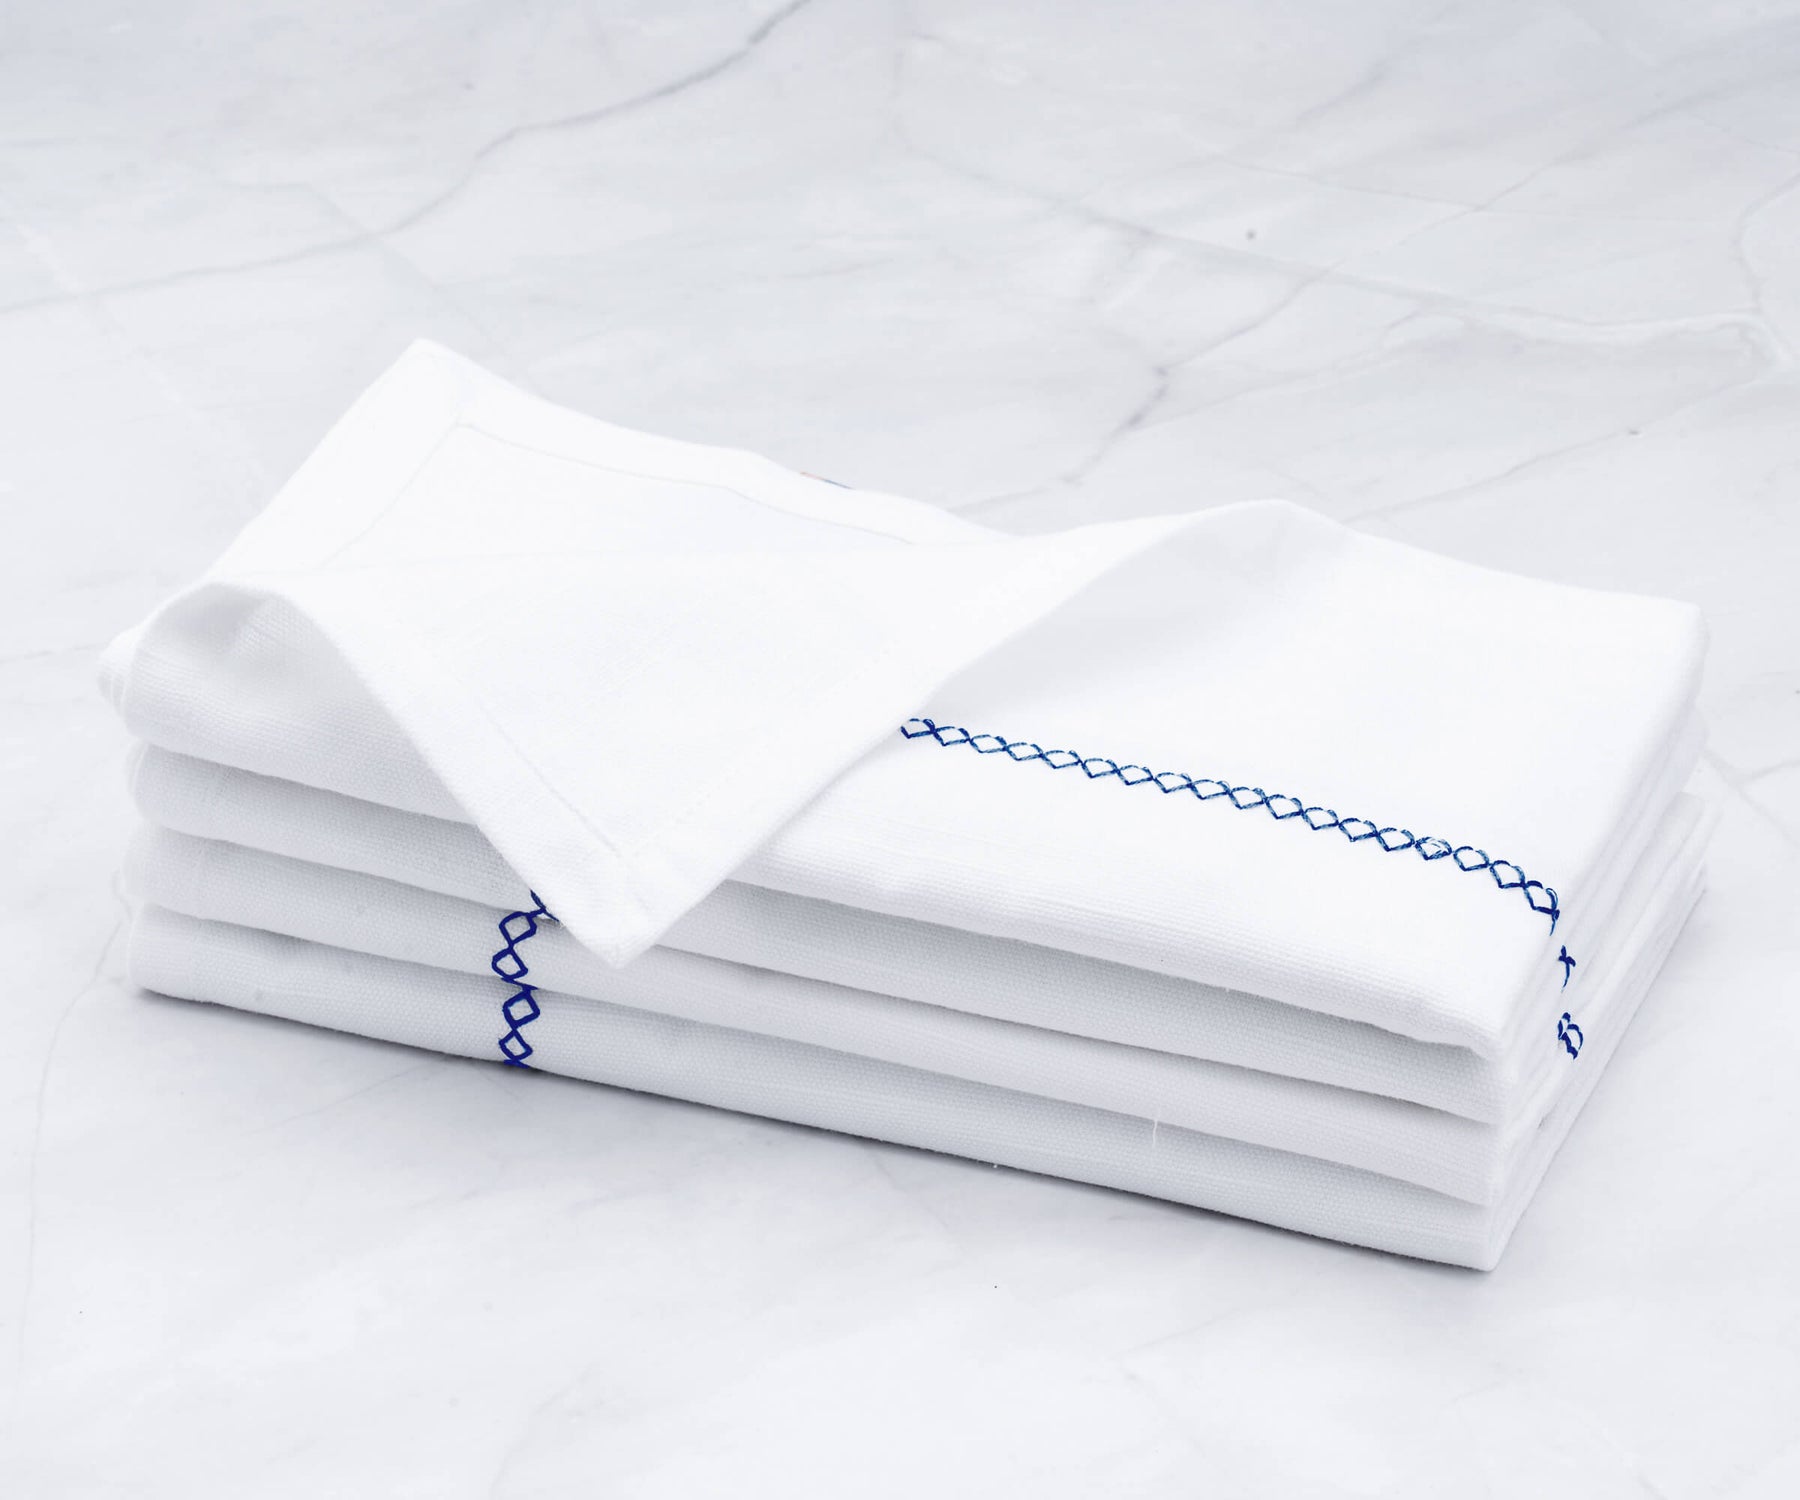 Many embroidery white napkins can be personalized with custom designs